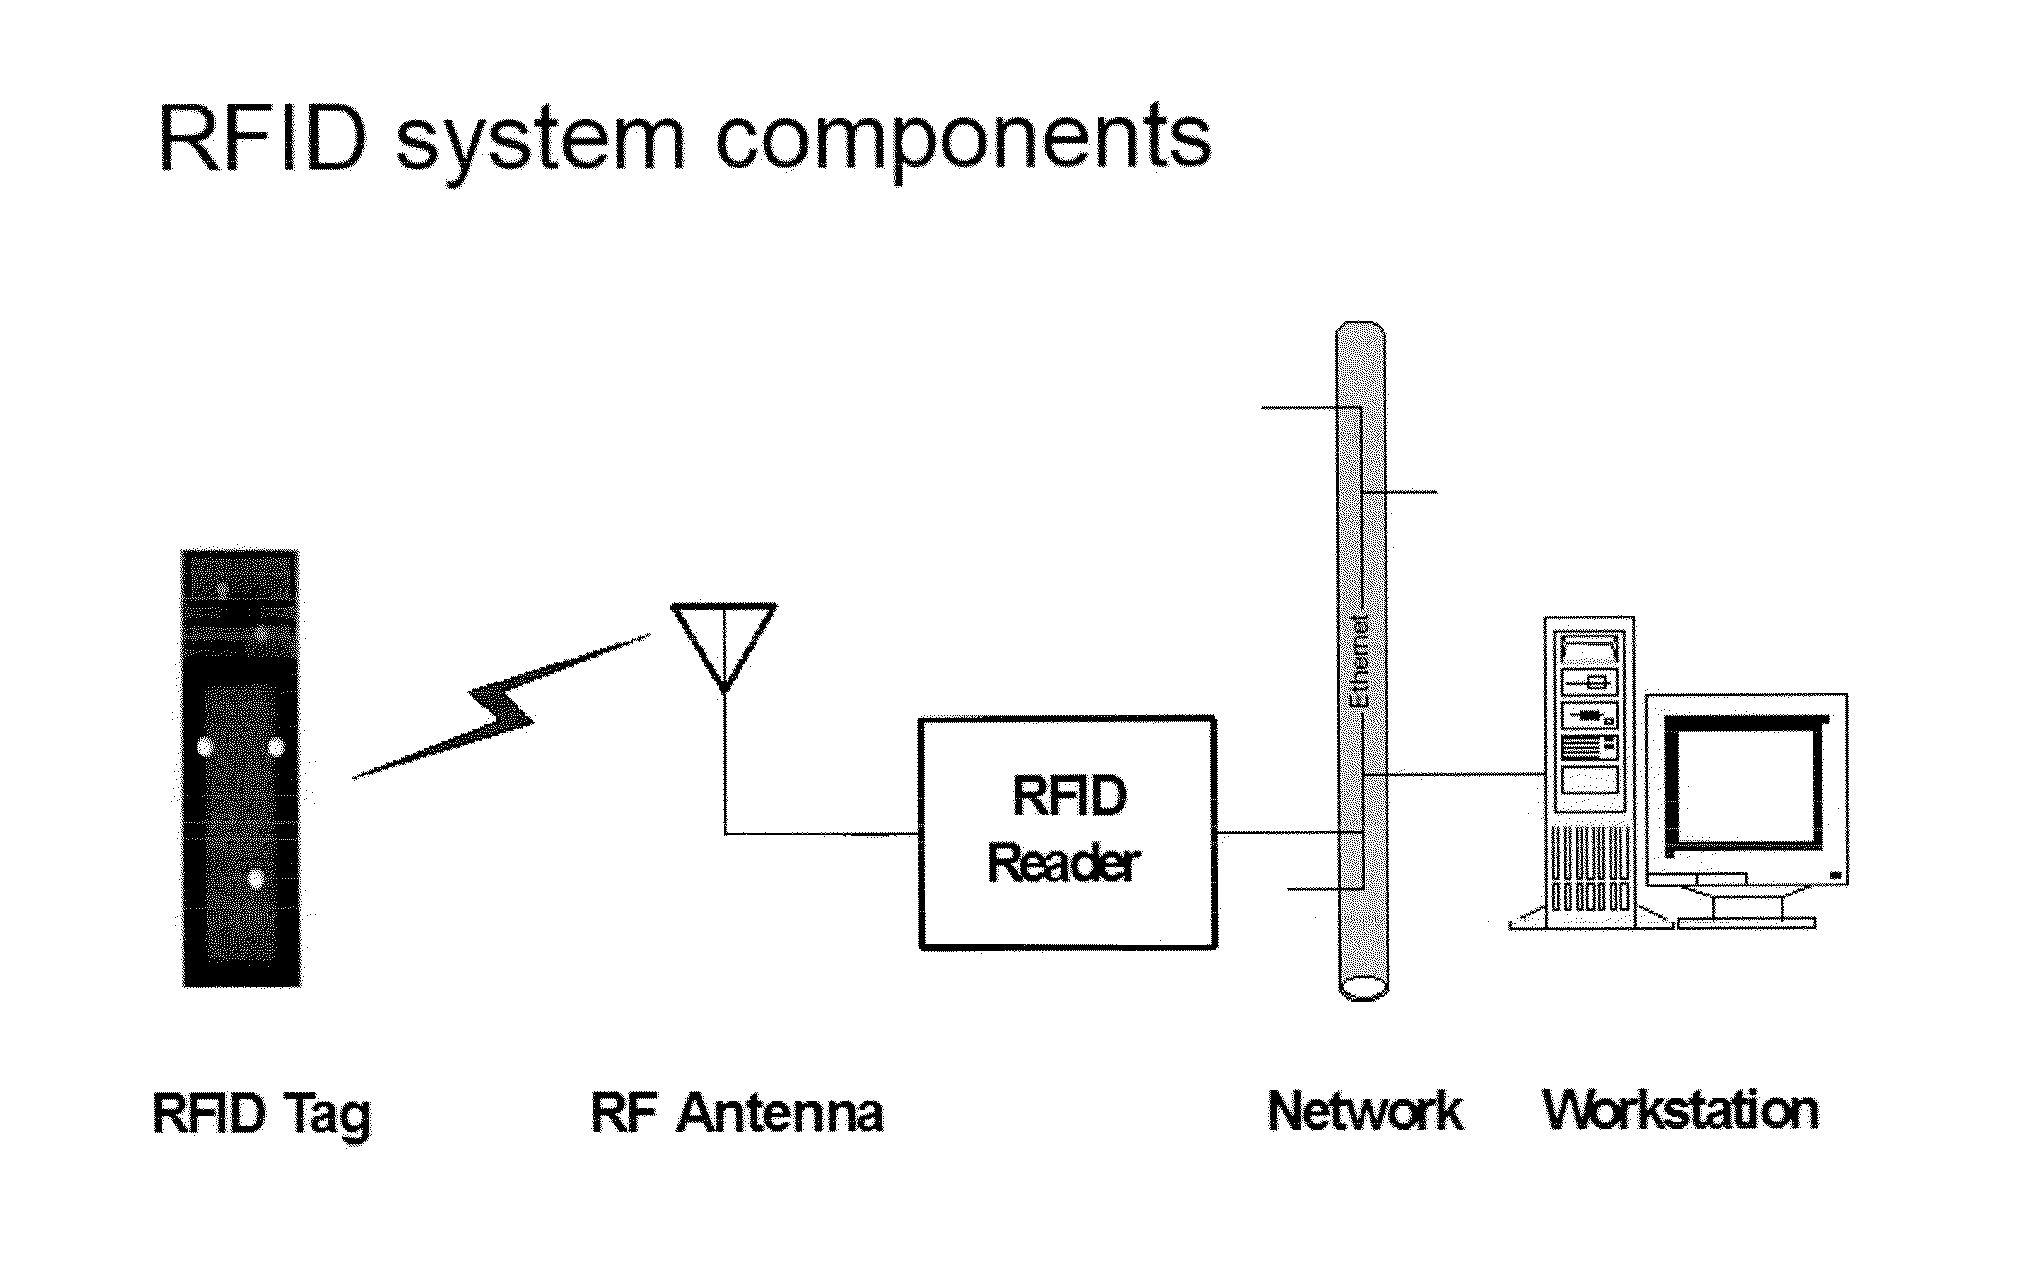 Systems, computer media, and methods for using electromagnetic frequency (EMF) identification (ID) devices for monitoring, collection, analysis, use and tracking of personal, medical, transaction, and location data for one or more individuals